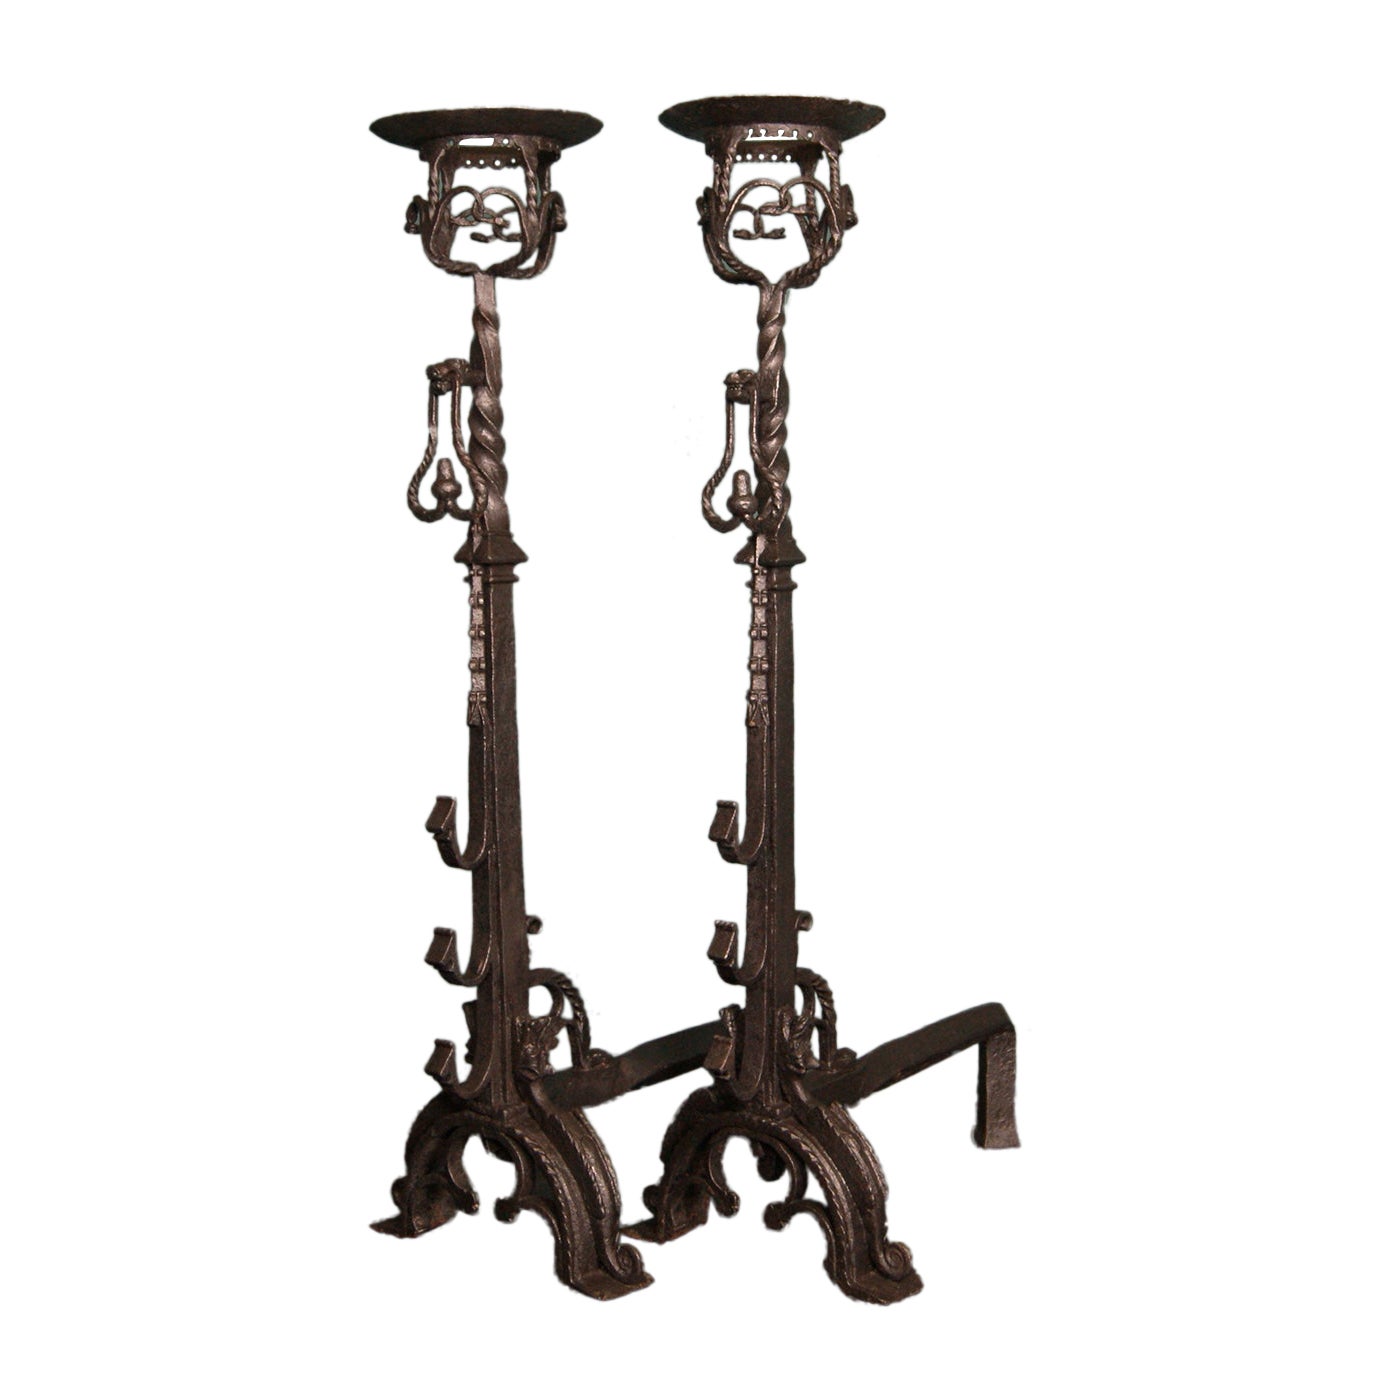 A Pair of Monumental Neo-Gothic Wrought-Iron Fireplace Andirons Fire Dogs For Sale